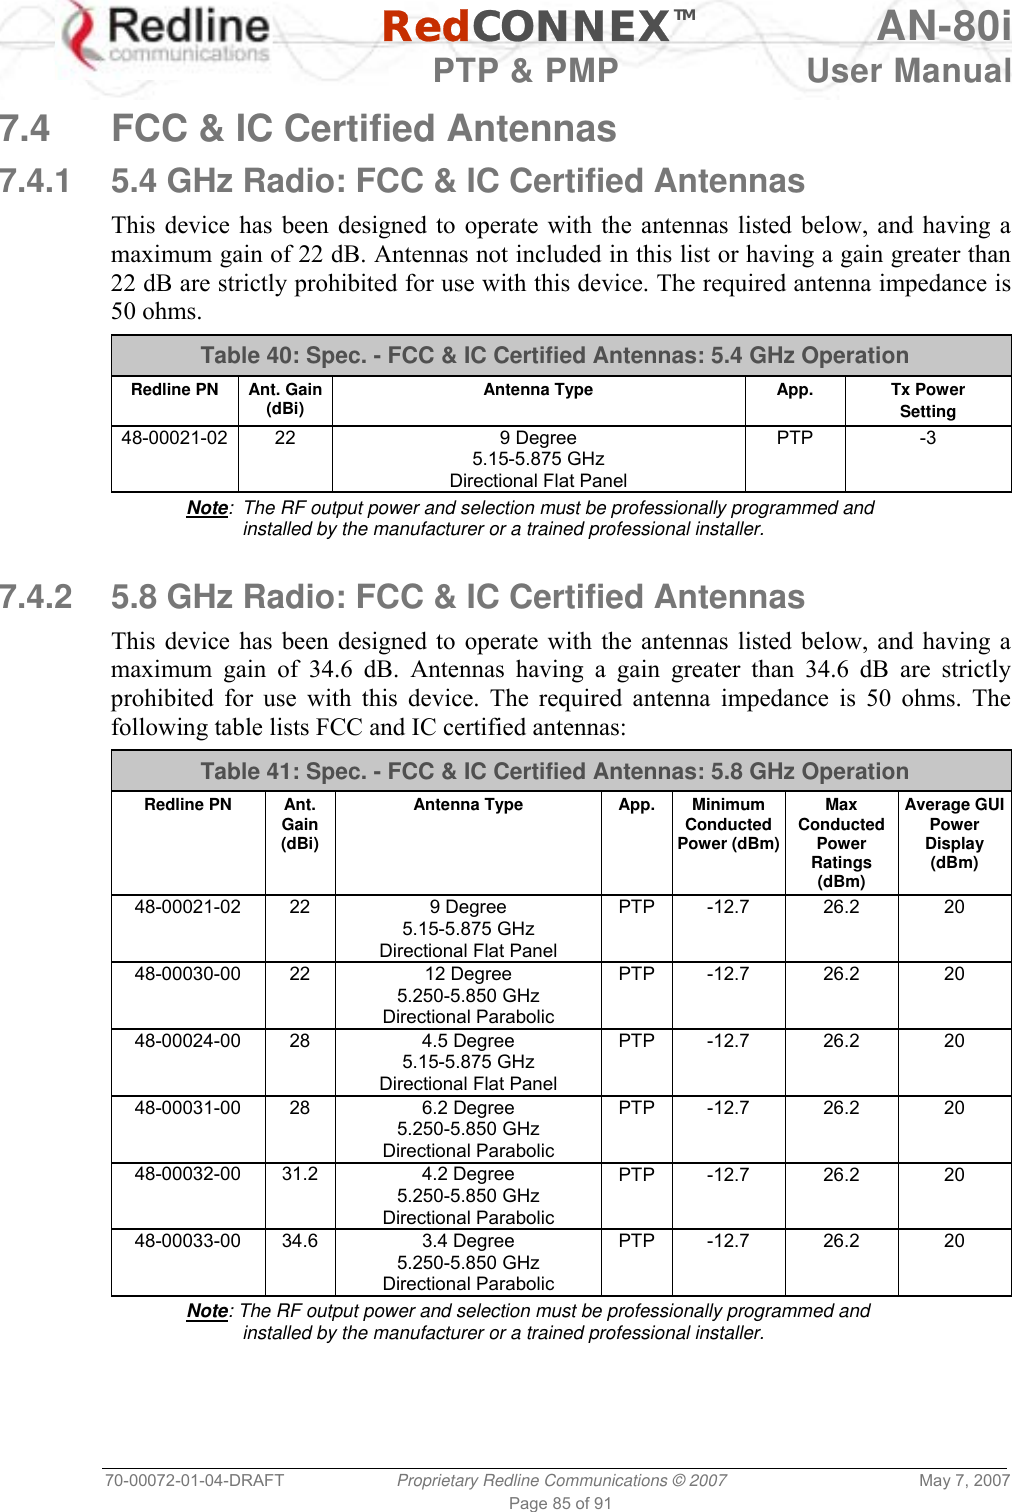   RedCONNEXTM AN-80i   PTP &amp; PMP  User Manual 70-00072-01-04-DRAFT  Proprietary Redline Communications © 2007  May 7, 2007 Page 85 of 91  7.4  FCC &amp; IC Certified Antennas 7.4.1  5.4 GHz Radio: FCC &amp; IC Certified Antennas  This device has been designed to operate with the antennas listed below, and having a maximum gain of 22 dB. Antennas not included in this list or having a gain greater than 22 dB are strictly prohibited for use with this device. The required antenna impedance is 50 ohms. Table 40: Spec. - FCC &amp; IC Certified Antennas: 5.4 GHz Operation Redline PN  Ant. Gain (dBi)  Antenna Type  App.  Tx Power Setting 48-00021-02 22  9 Degree 5.15-5.875 GHz Directional Flat Panel PTP -3 Note:  The RF output power and selection must be professionally programmed and installed by the manufacturer or a trained professional installer.  7.4.2  5.8 GHz Radio: FCC &amp; IC Certified Antennas  This device has been designed to operate with the antennas listed below, and having a maximum gain of 34.6 dB. Antennas having a gain greater than 34.6 dB are strictly prohibited for use with this device. The required antenna impedance is 50 ohms. The following table lists FCC and IC certified antennas: Table 41: Spec. - FCC &amp; IC Certified Antennas: 5.8 GHz Operation Redline PN  Ant. Gain (dBi) Antenna Type  App.  Minimum Conducted Power (dBm) Max Conducted Power Ratings (dBm) Average GUI Power Display (dBm) 48-00021-02 22  9 Degree 5.15-5.875 GHz Directional Flat Panel PTP -12.7  26.2  20 48-00030-00 22  12 Degree 5.250-5.850 GHz Directional Parabolic PTP -12.7  26.2  20 48-00024-00 28  4.5 Degree 5.15-5.875 GHz Directional Flat Panel PTP -12.7  26.2  20 48-00031-00 28  6.2 Degree 5.250-5.850 GHz Directional Parabolic PTP -12.7  26.2  20 48-00032-00 31.2  4.2 Degree 5.250-5.850 GHz Directional Parabolic PTP -12.7  26.2  20 48-00033-00 34.6  3.4 Degree 5.250-5.850 GHz Directional Parabolic PTP -12.7  26.2  20 Note: The RF output power and selection must be professionally programmed and installed by the manufacturer or a trained professional installer. 